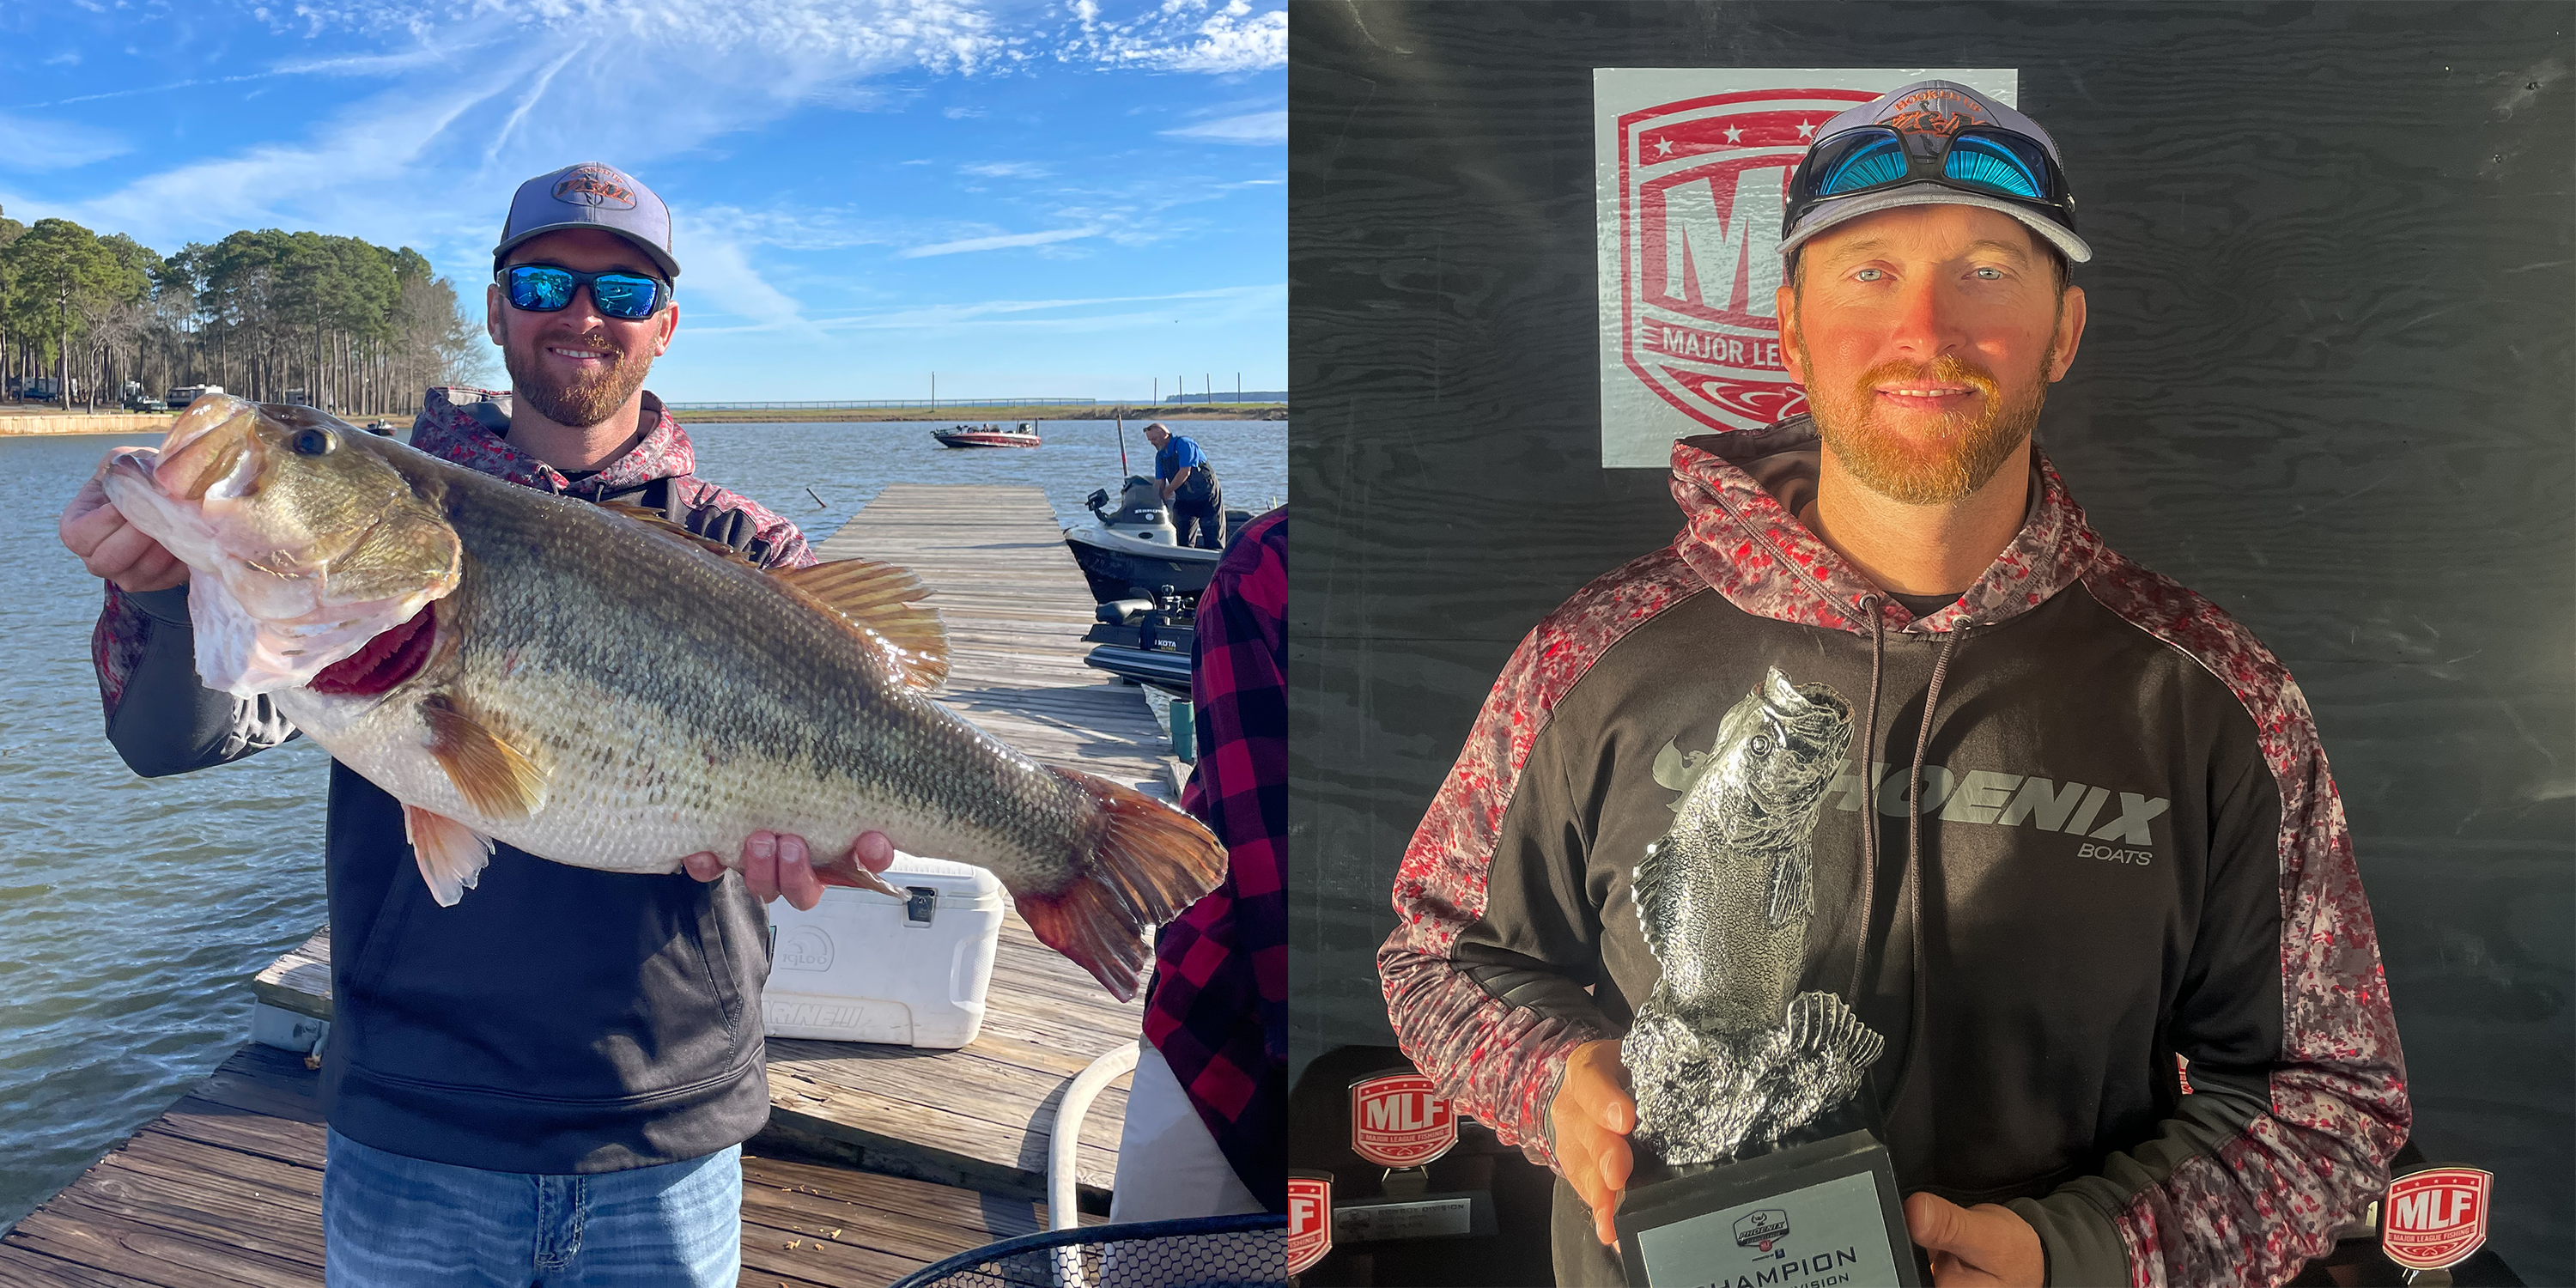 Pitt smashes MLF records with 13-6 largemouth, bags 39-15 five-fish limit  on Toledo Bend - Major League Fishing